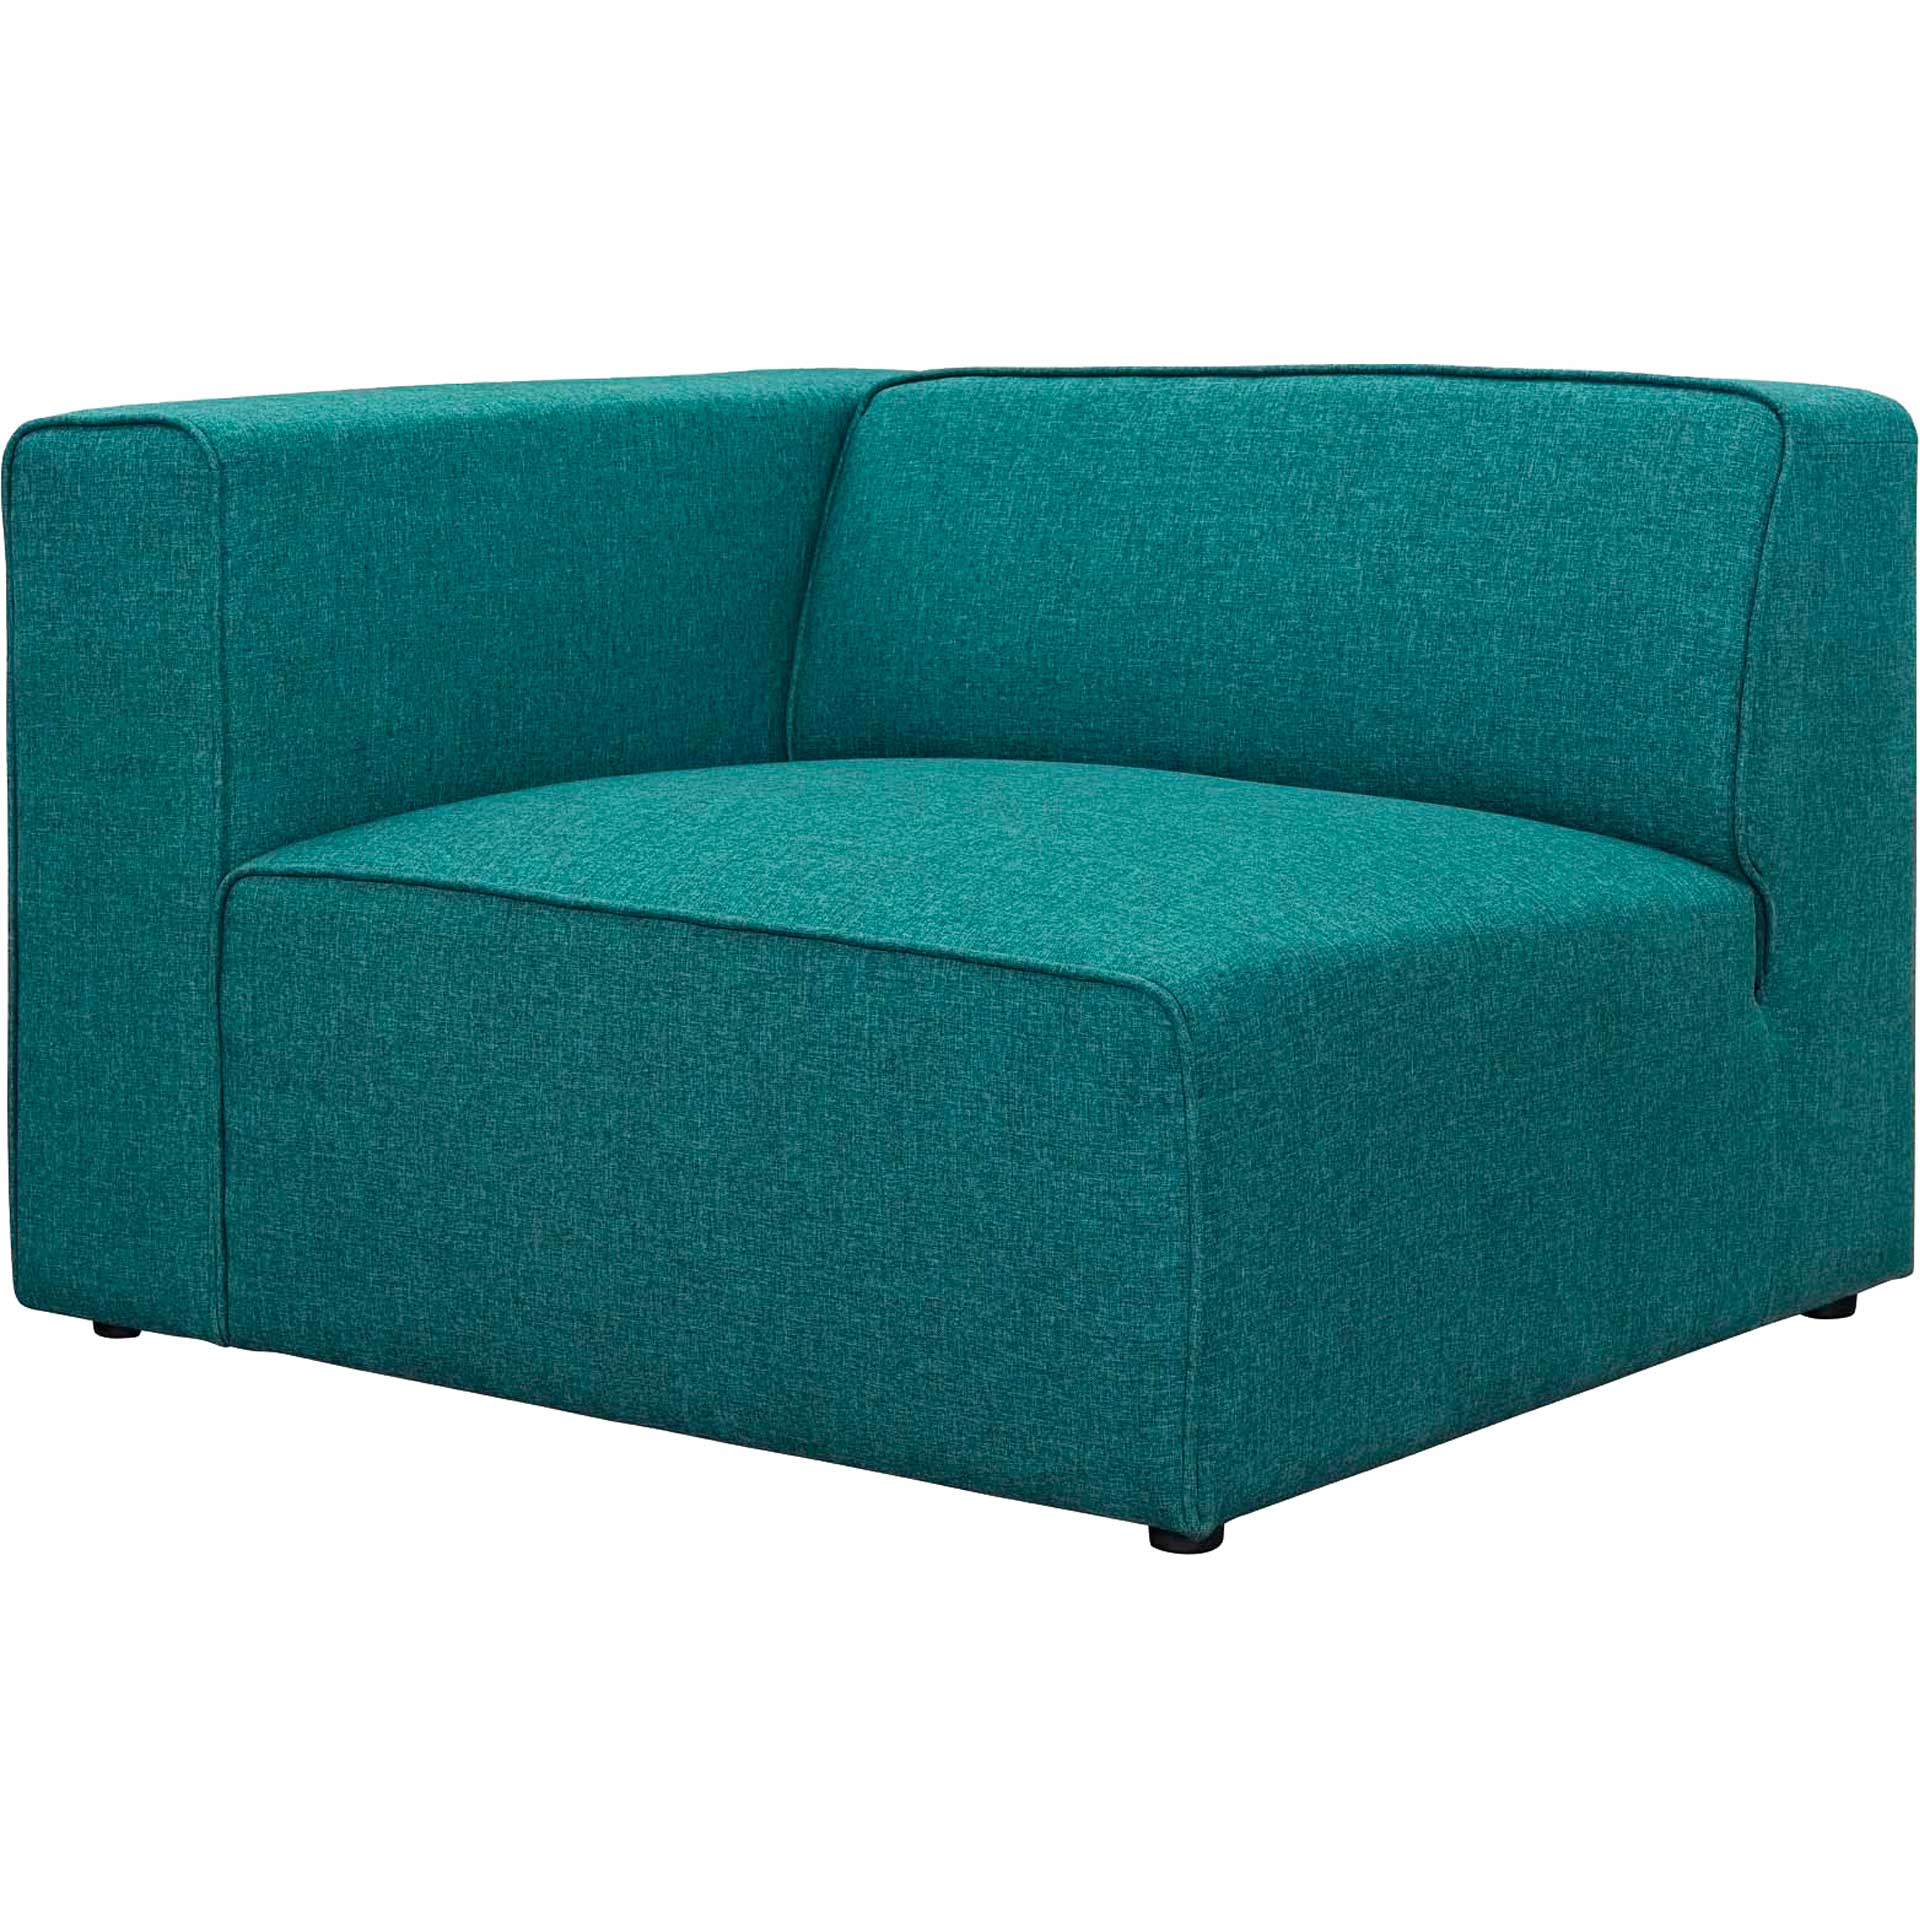 Maisie 7 Piece L-Shaped Sectional Sofa Teal